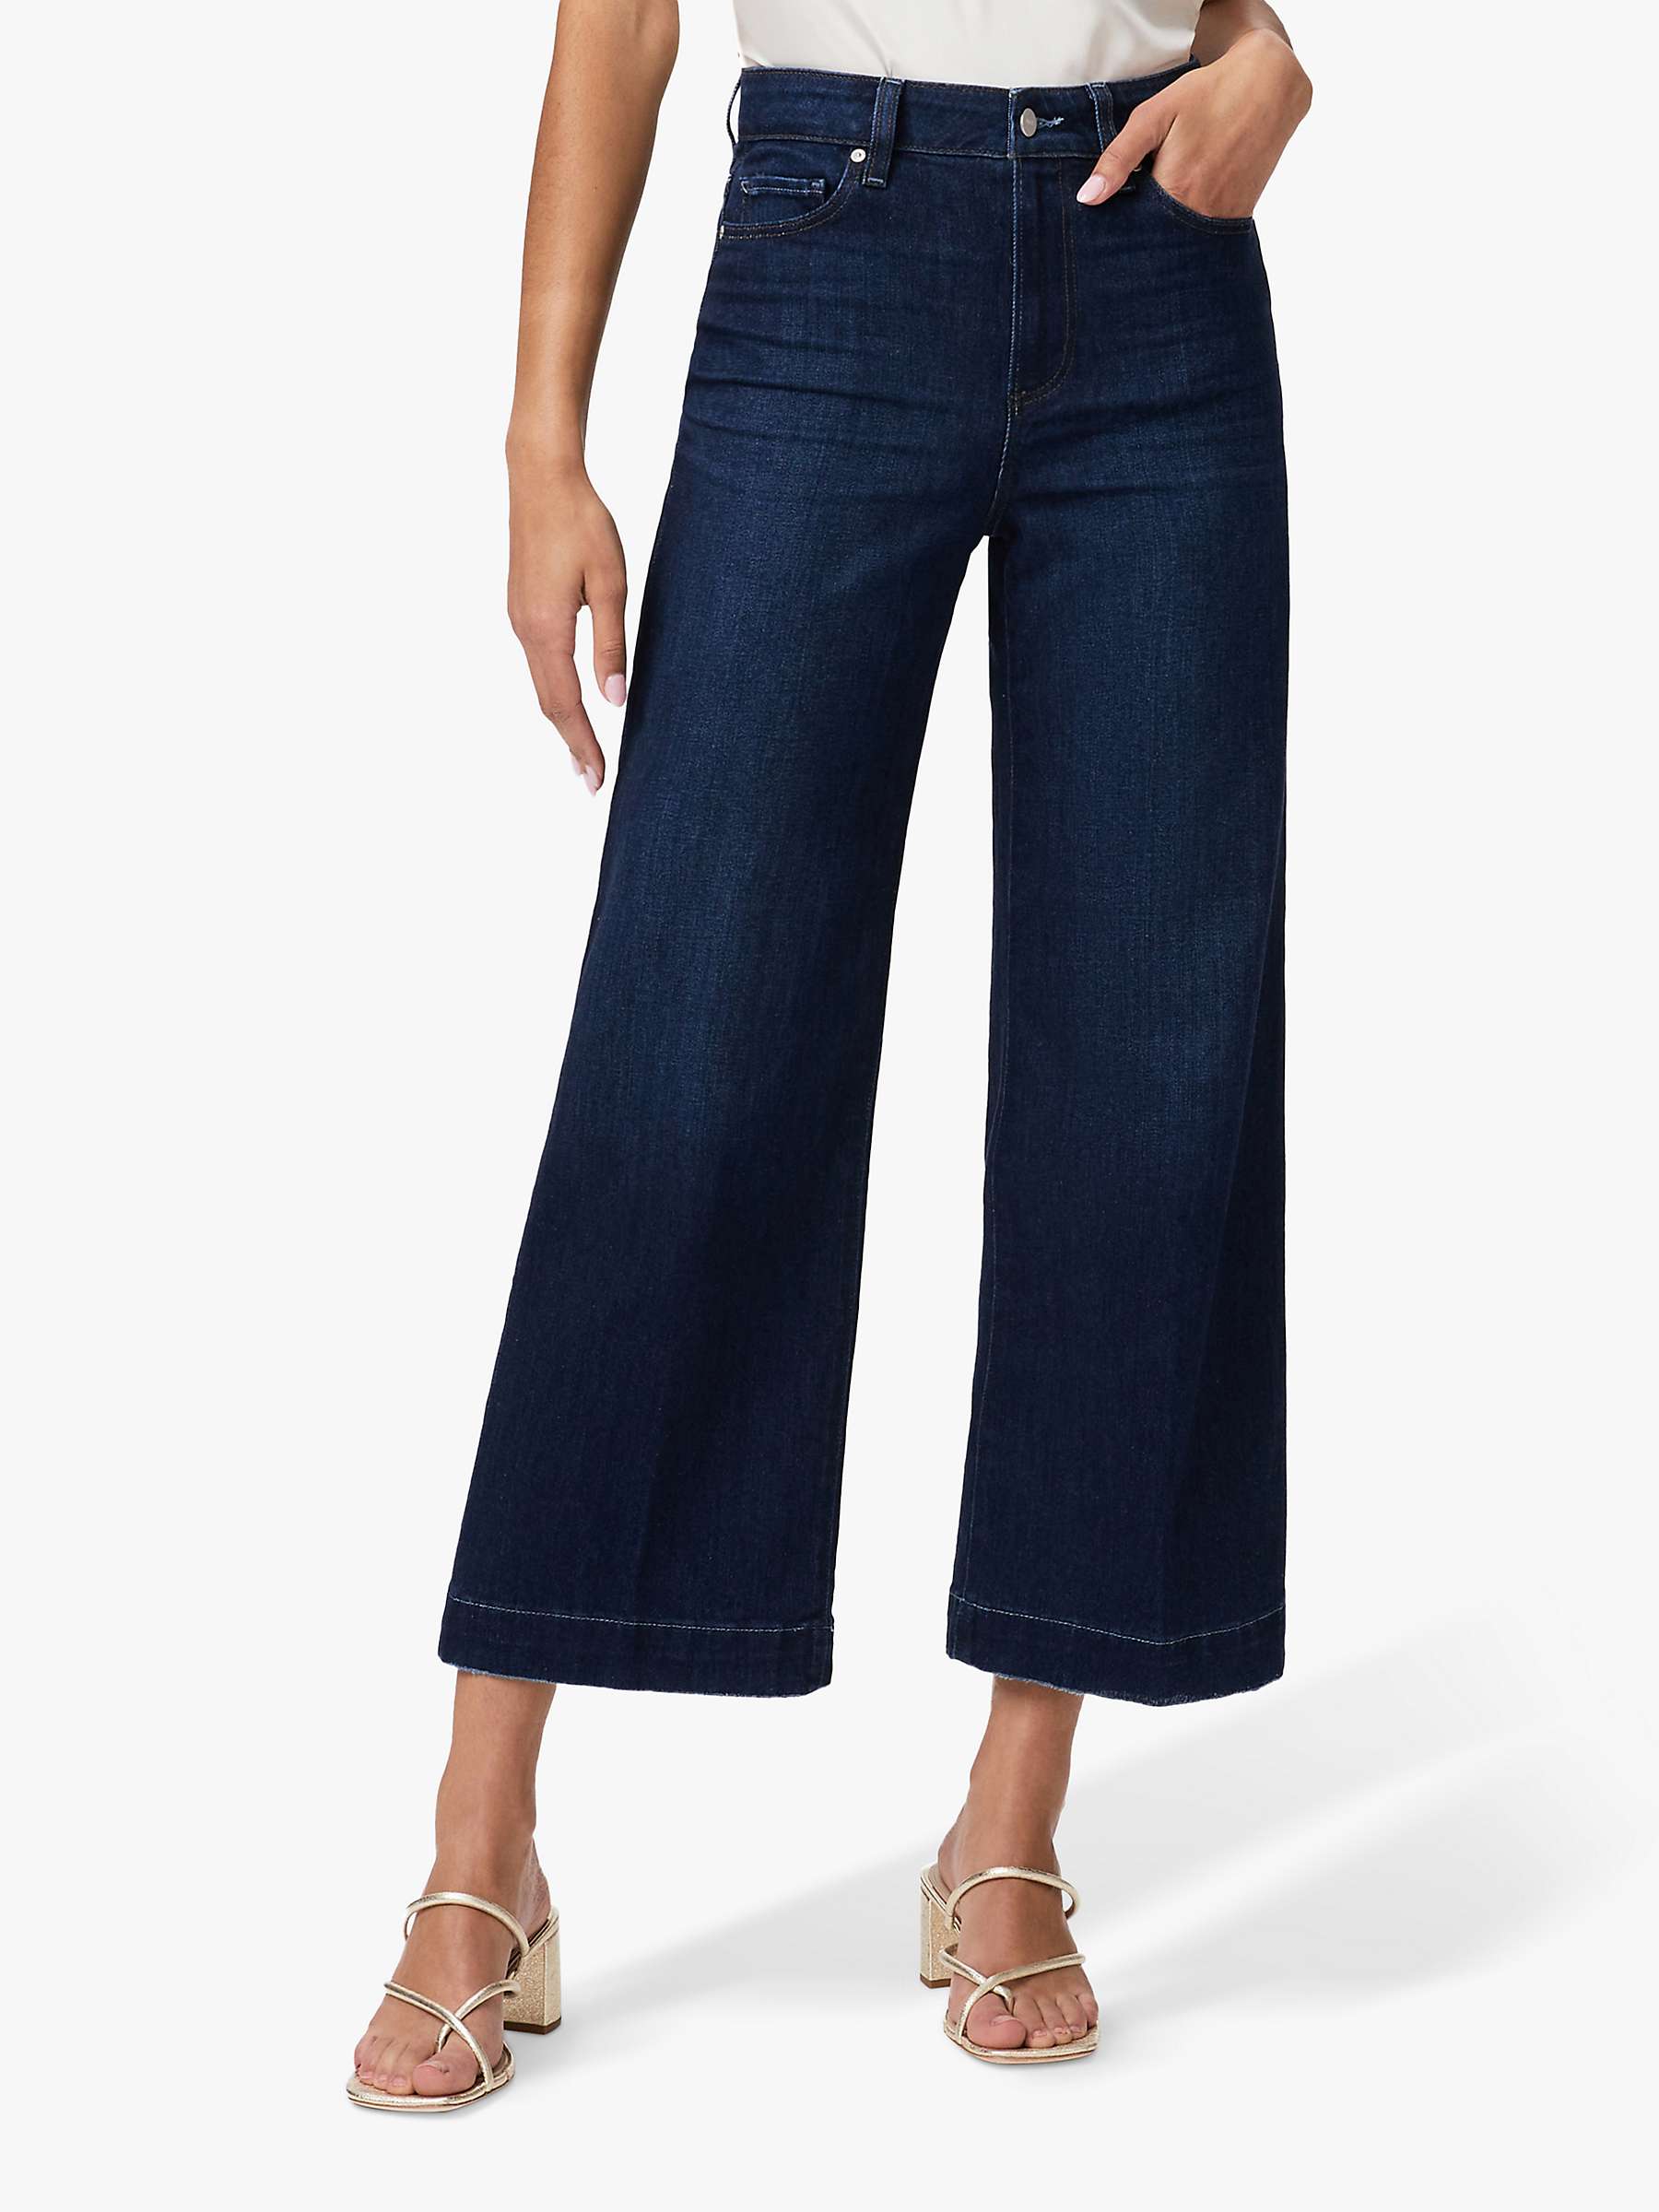 PAIGE Anessa Wide Leg Ankle Jeans, The Disco at John Lewis & Partners